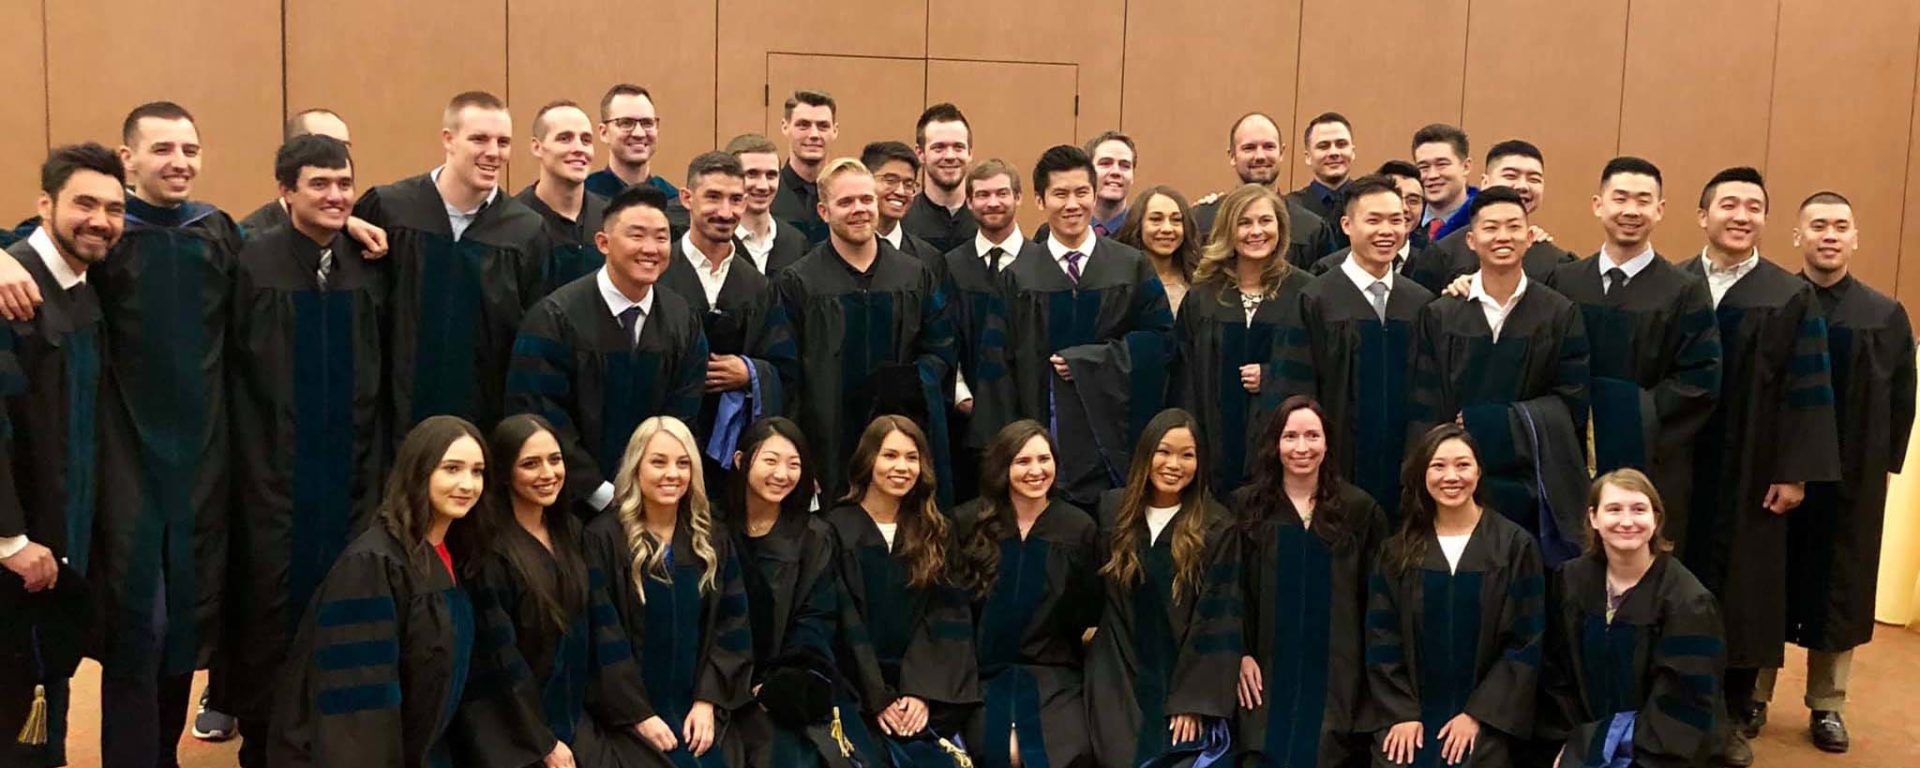 School of Physical Therapy’s Class of 2019